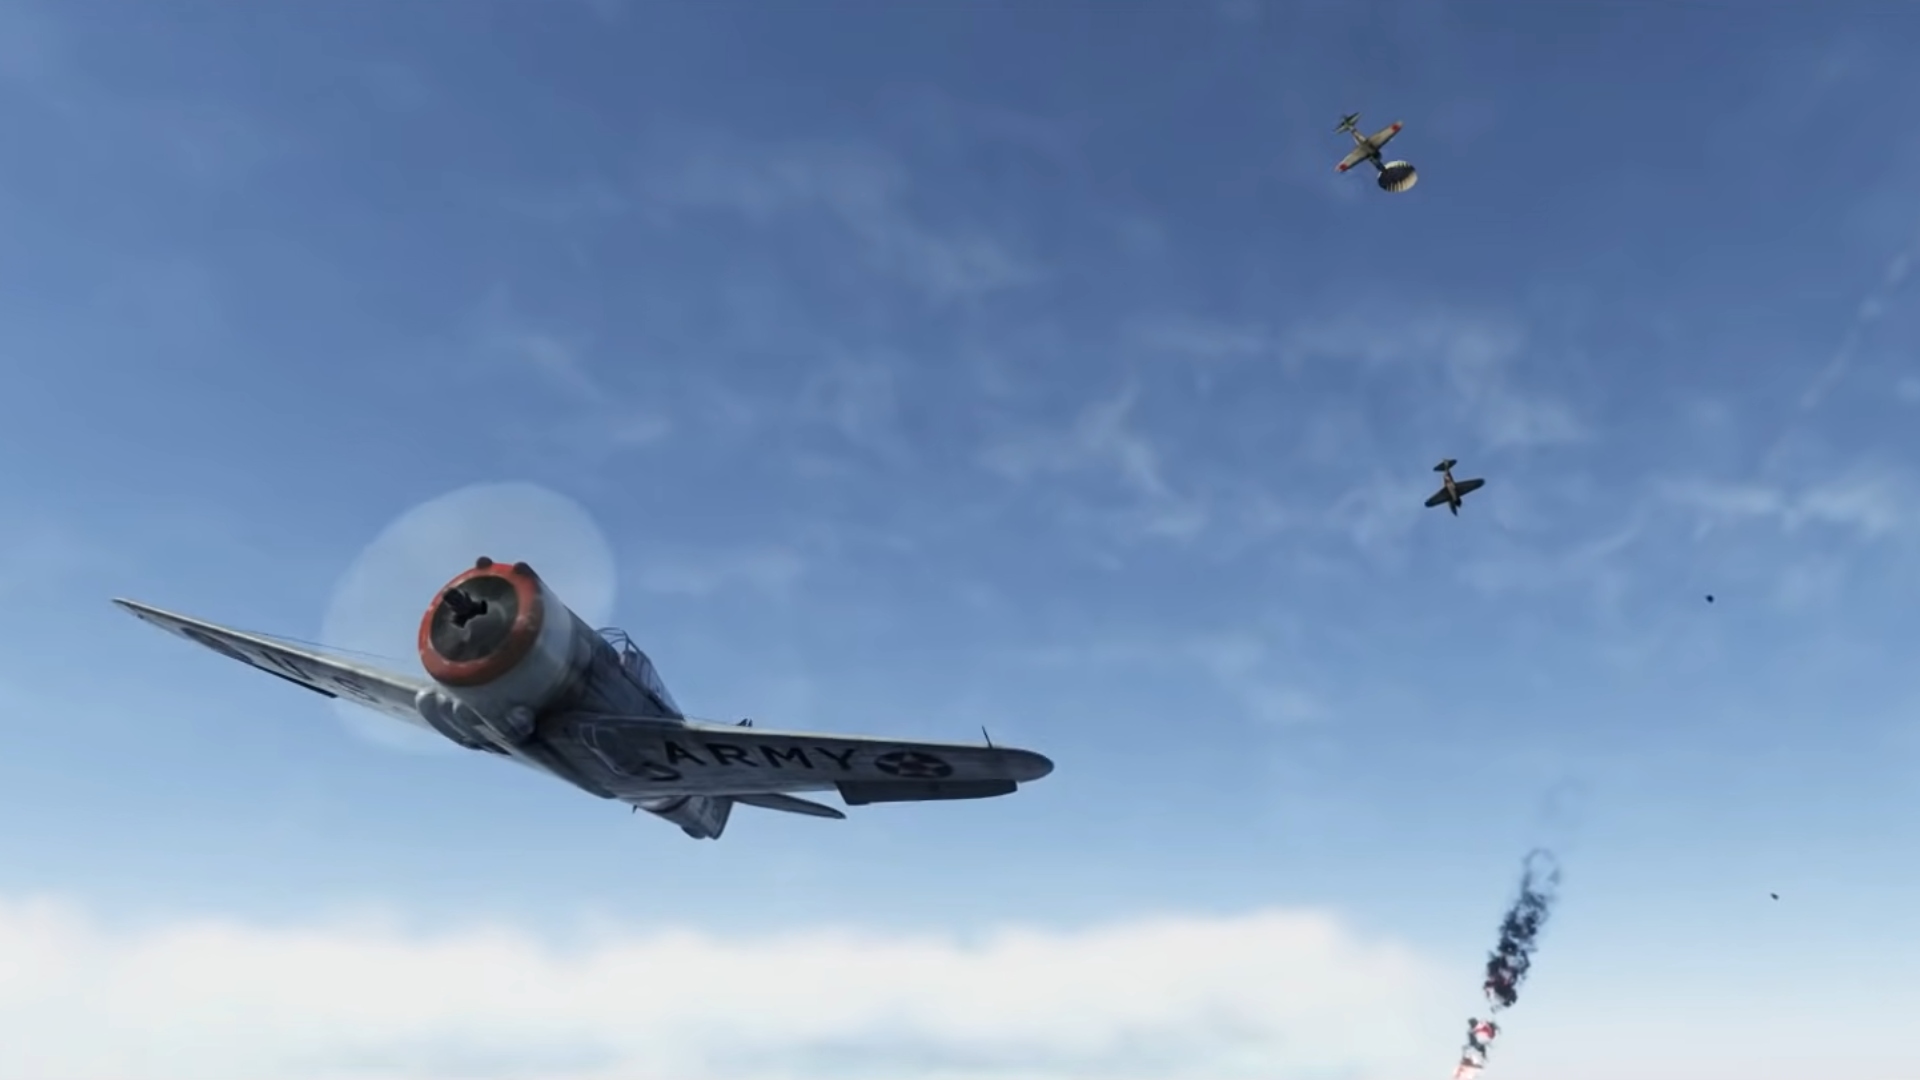 Best war games: a small plane flies through the clear blue sky as smaller planes descend in the background